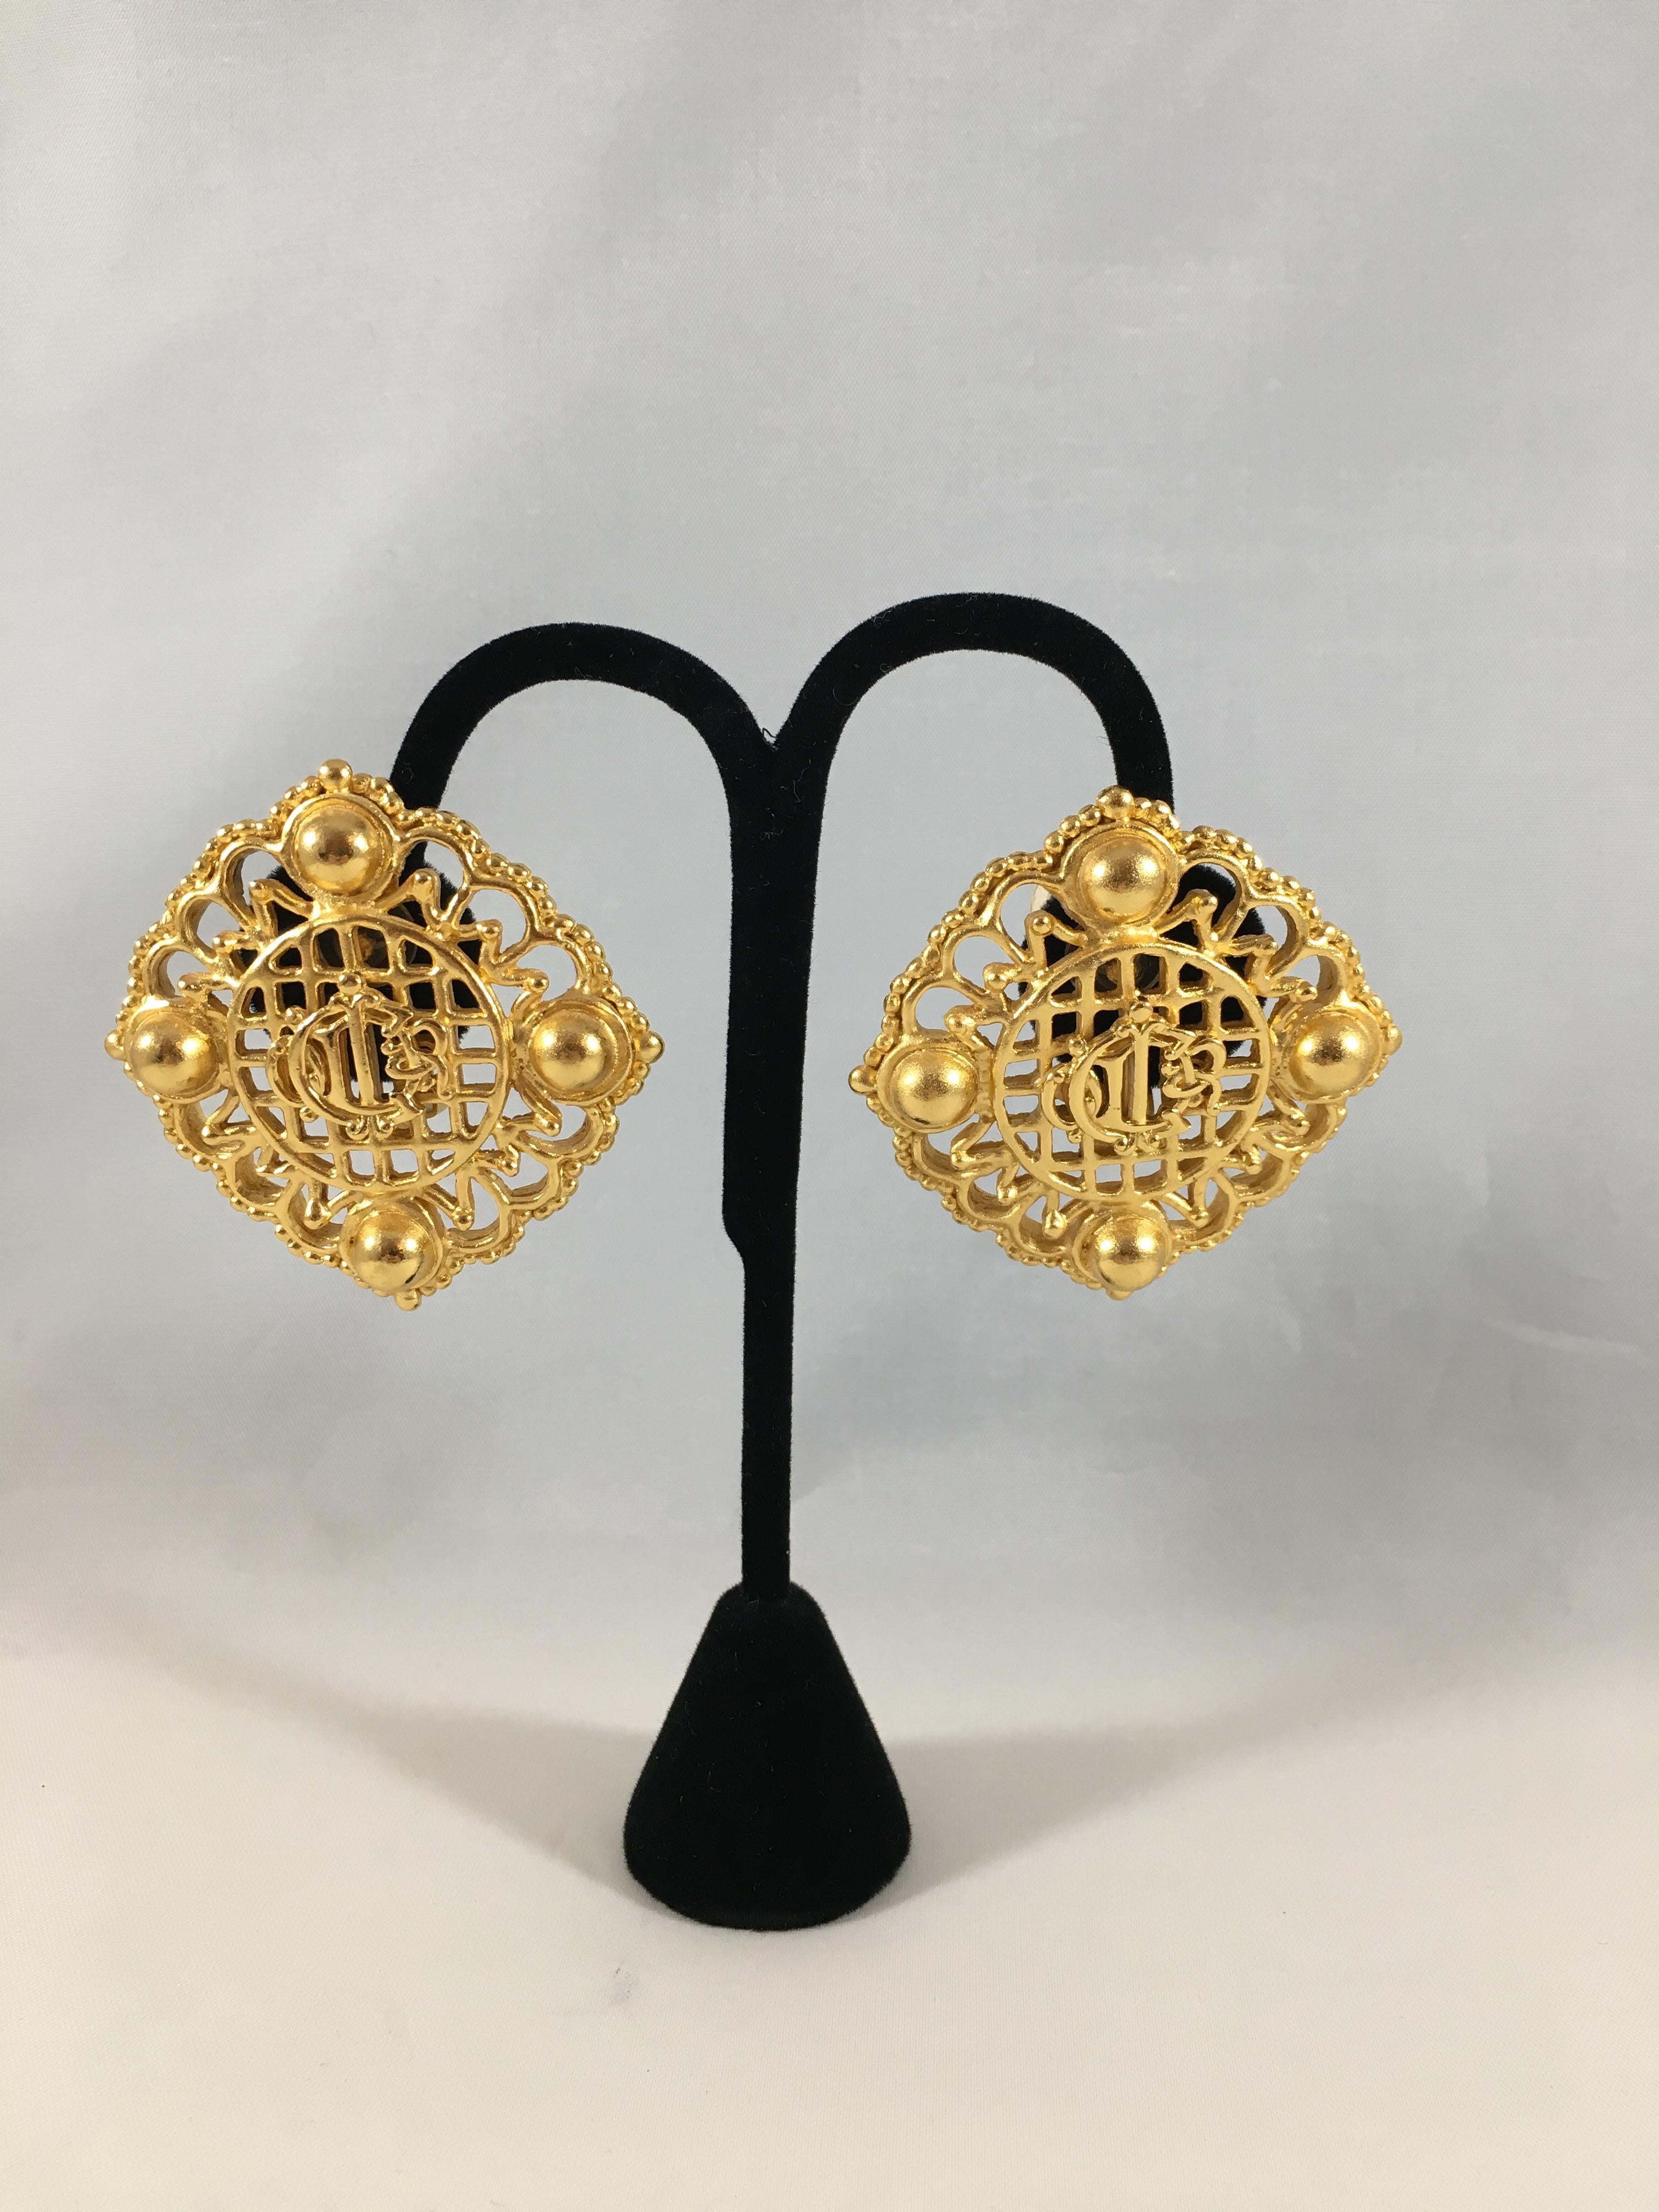 Spectacular Christian Dior gold-tone logo clip-on earrings. These earrings are fabulous and ready to made a statement. They feature an interlocking Christian Dior monogram used by Dior since the 1950s. The earrings are beautifully crafted and are